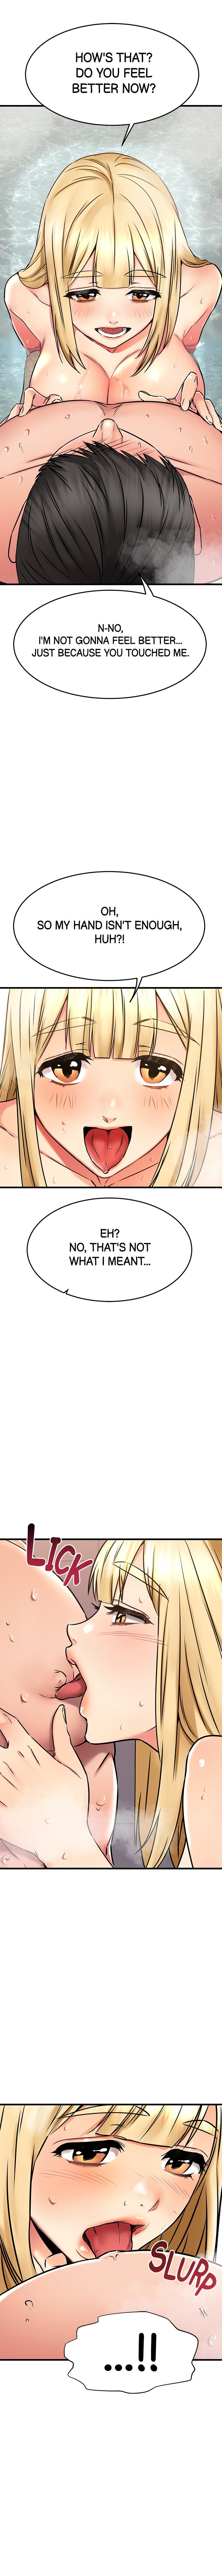 my-female-friend-who-crossed-the-line-chap-47-5